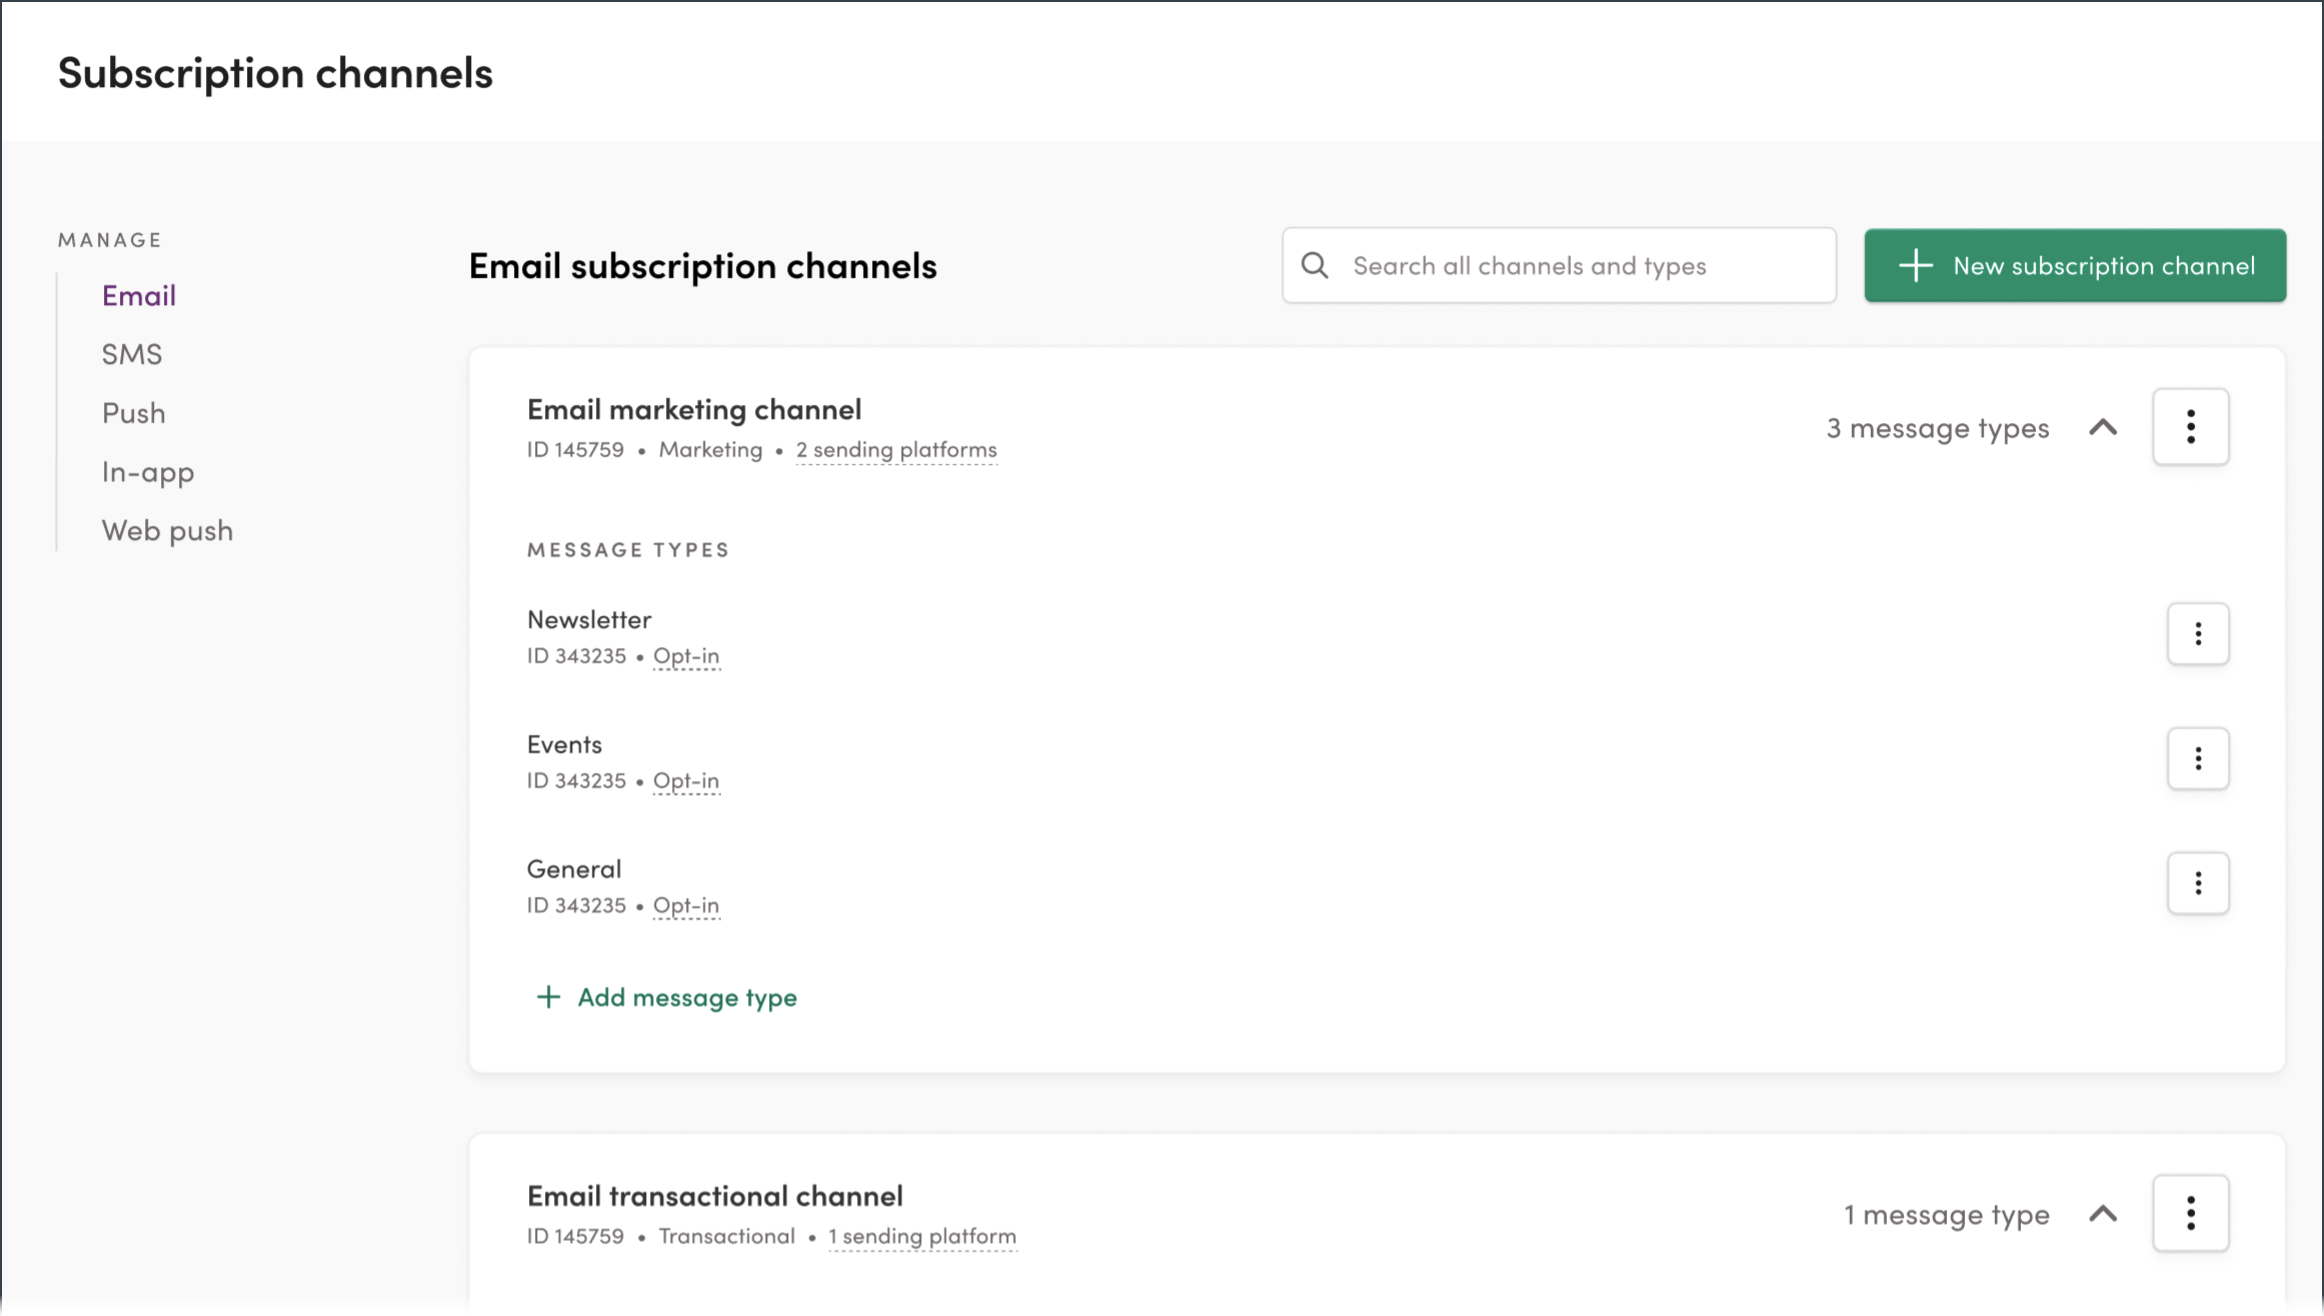 The Subscription Channels page in Iterable